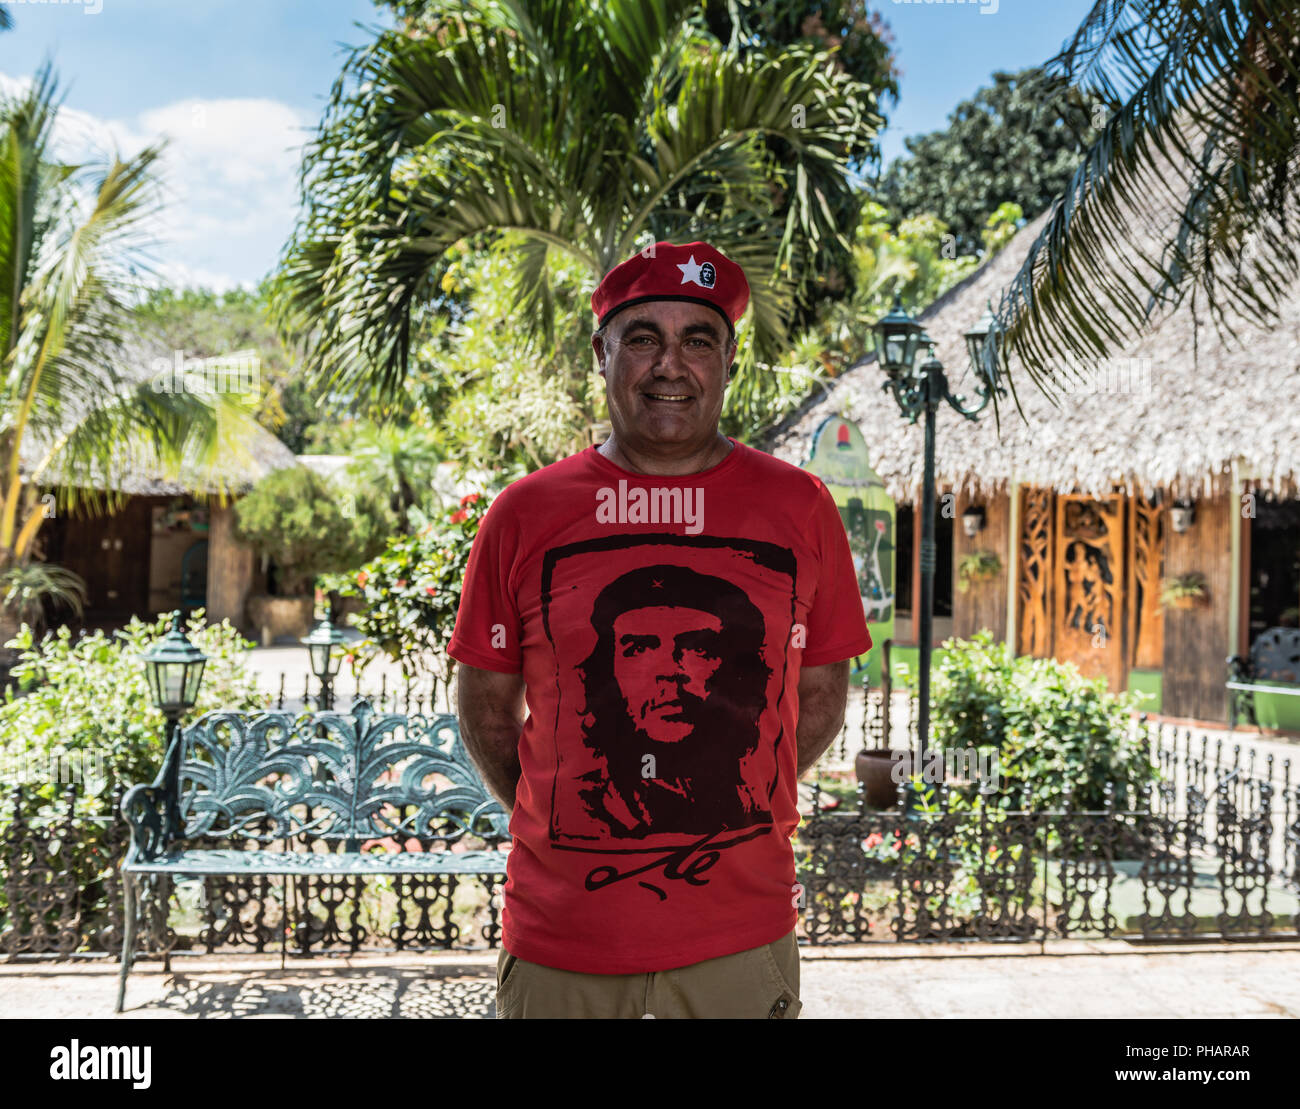 Santa Clara, Cuba / March 16, 2016: Man dressed like revolutionary Che Guevara in the city where the famous military leader is interred. Stock Photo